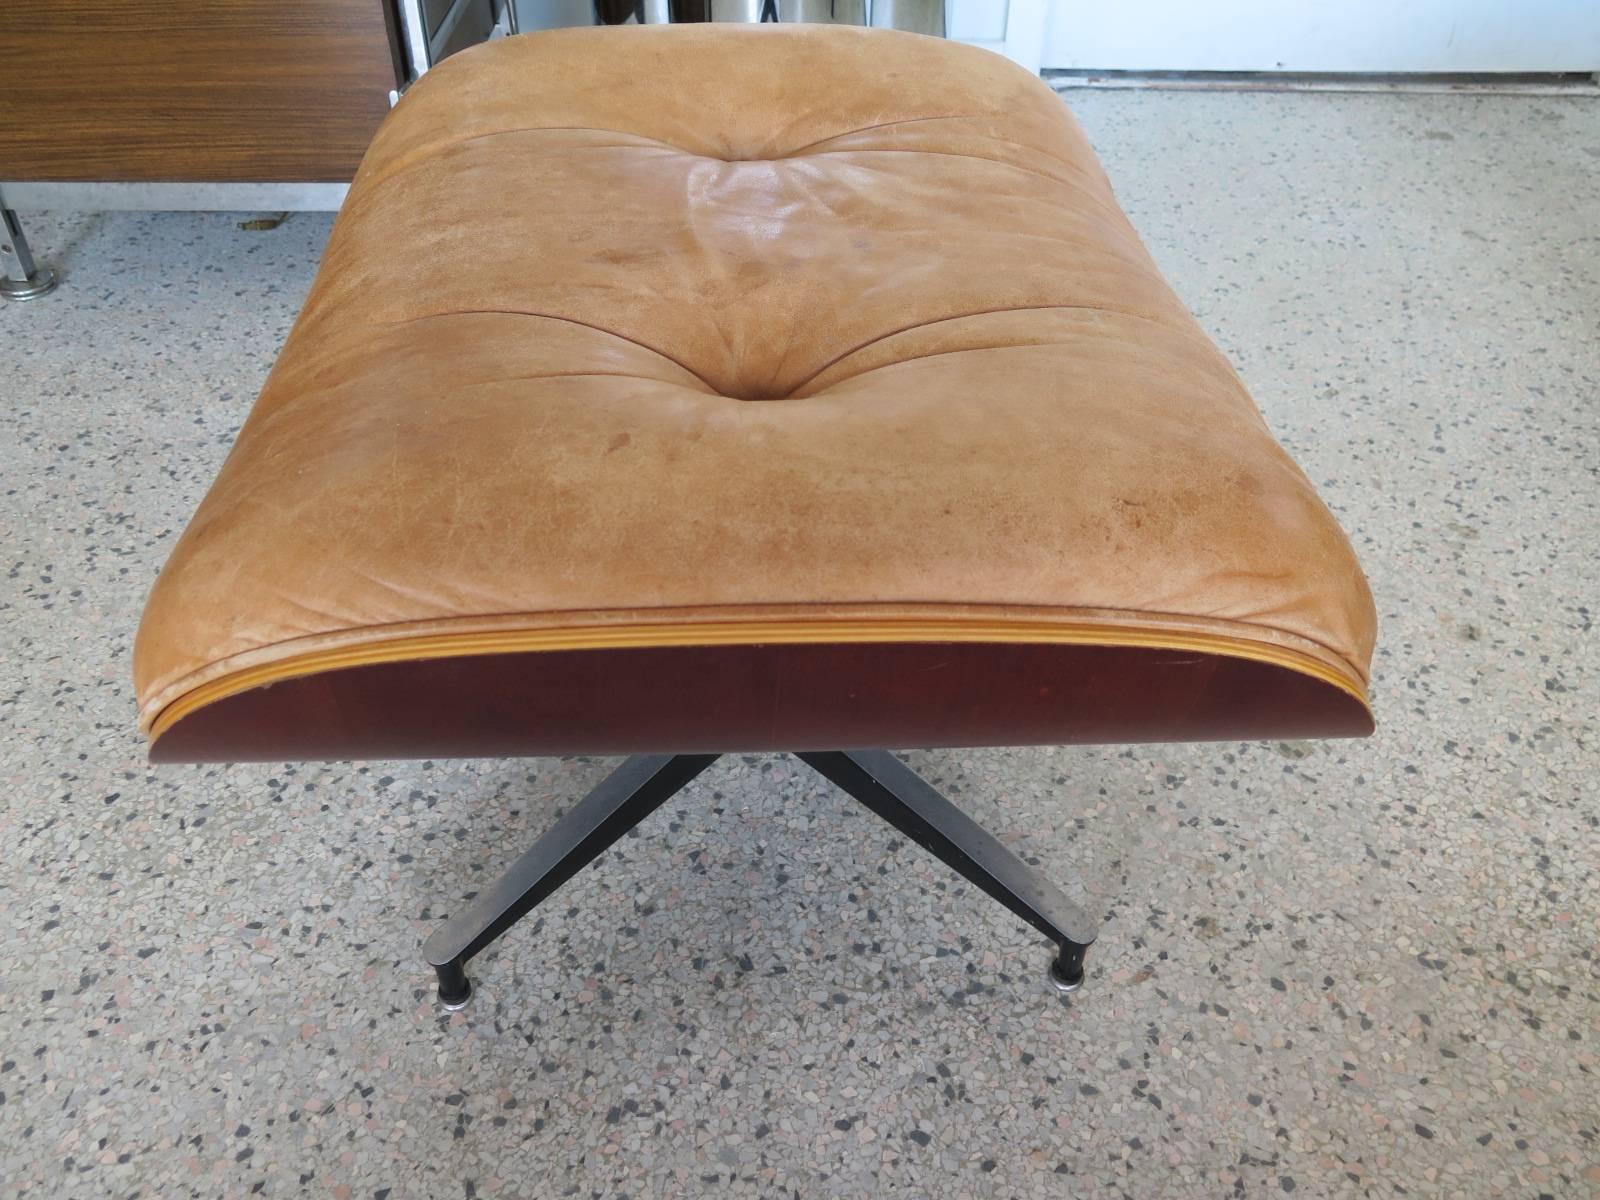 Charles Eames Herman Miller Leather Ottoman 671 4